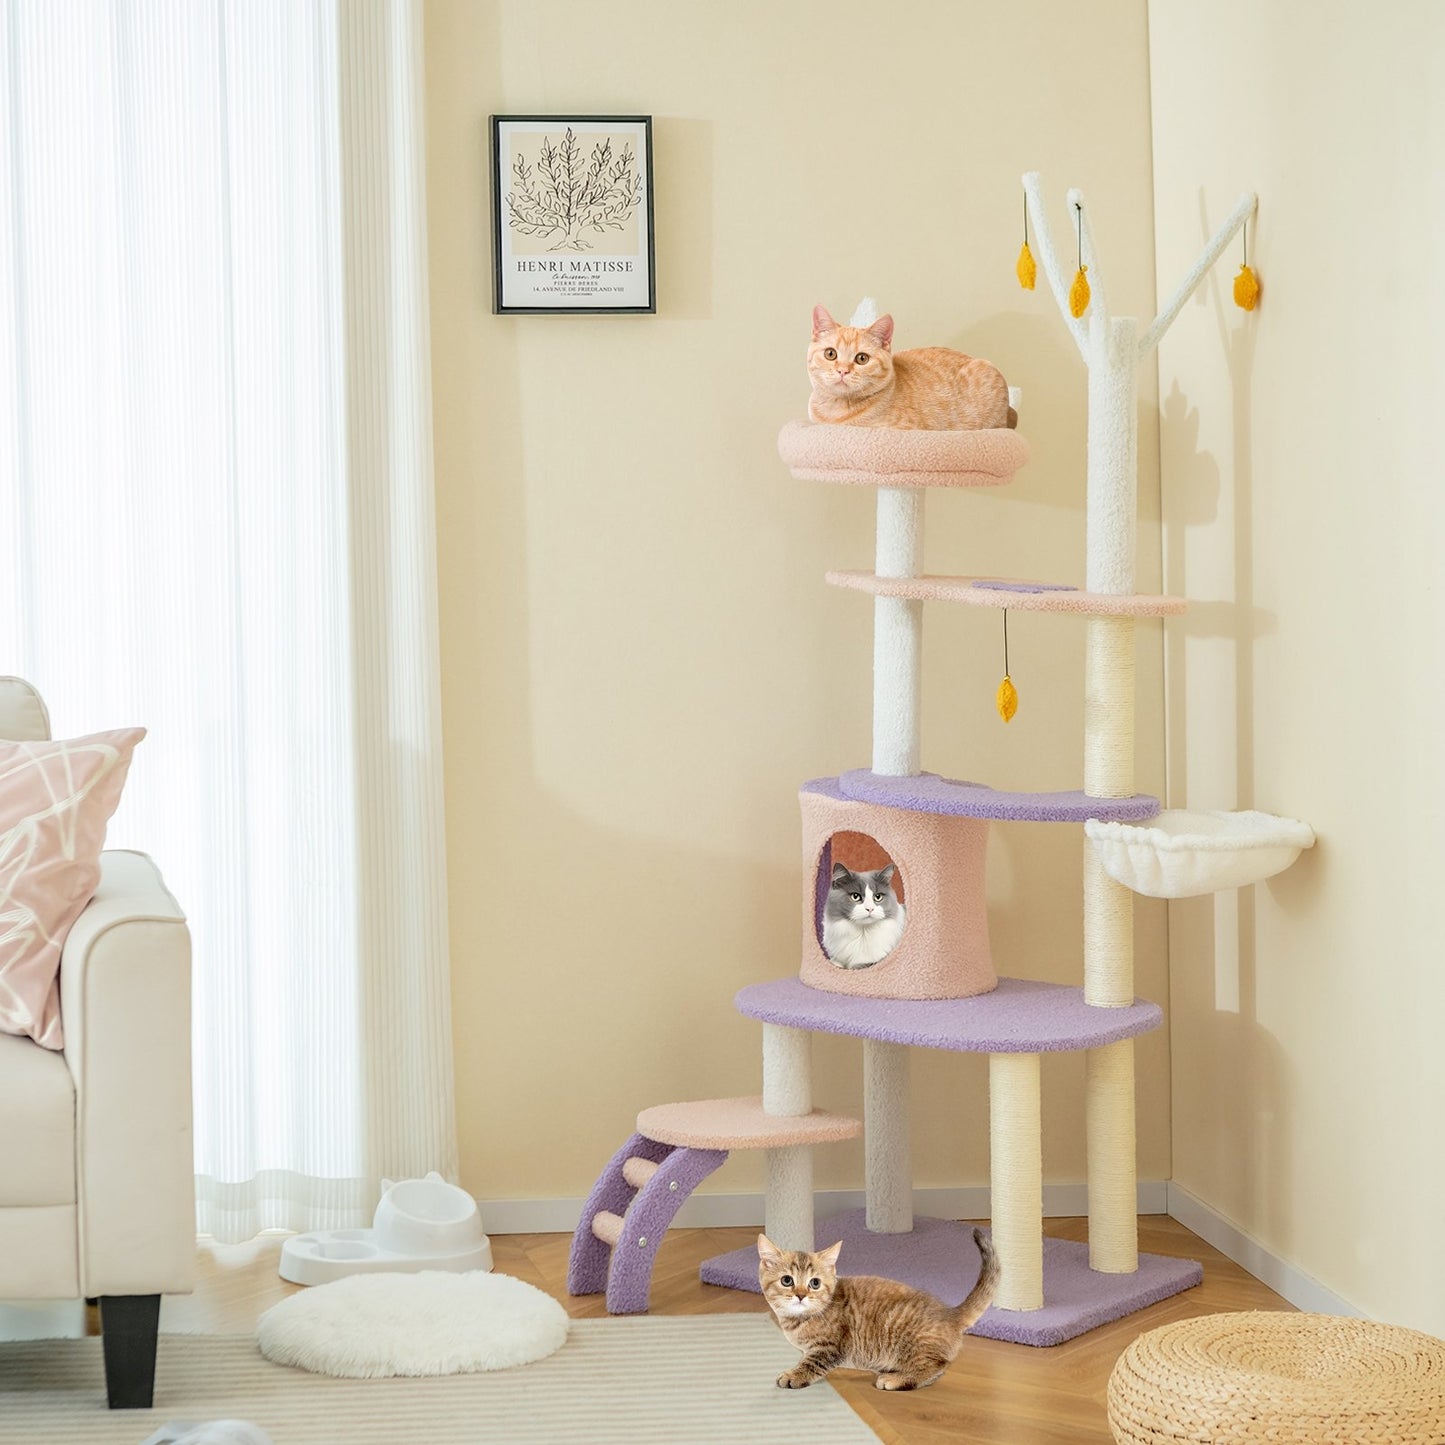 Multi-level Cat Tower with Sisal Covered Scratching Posts-M, Purple